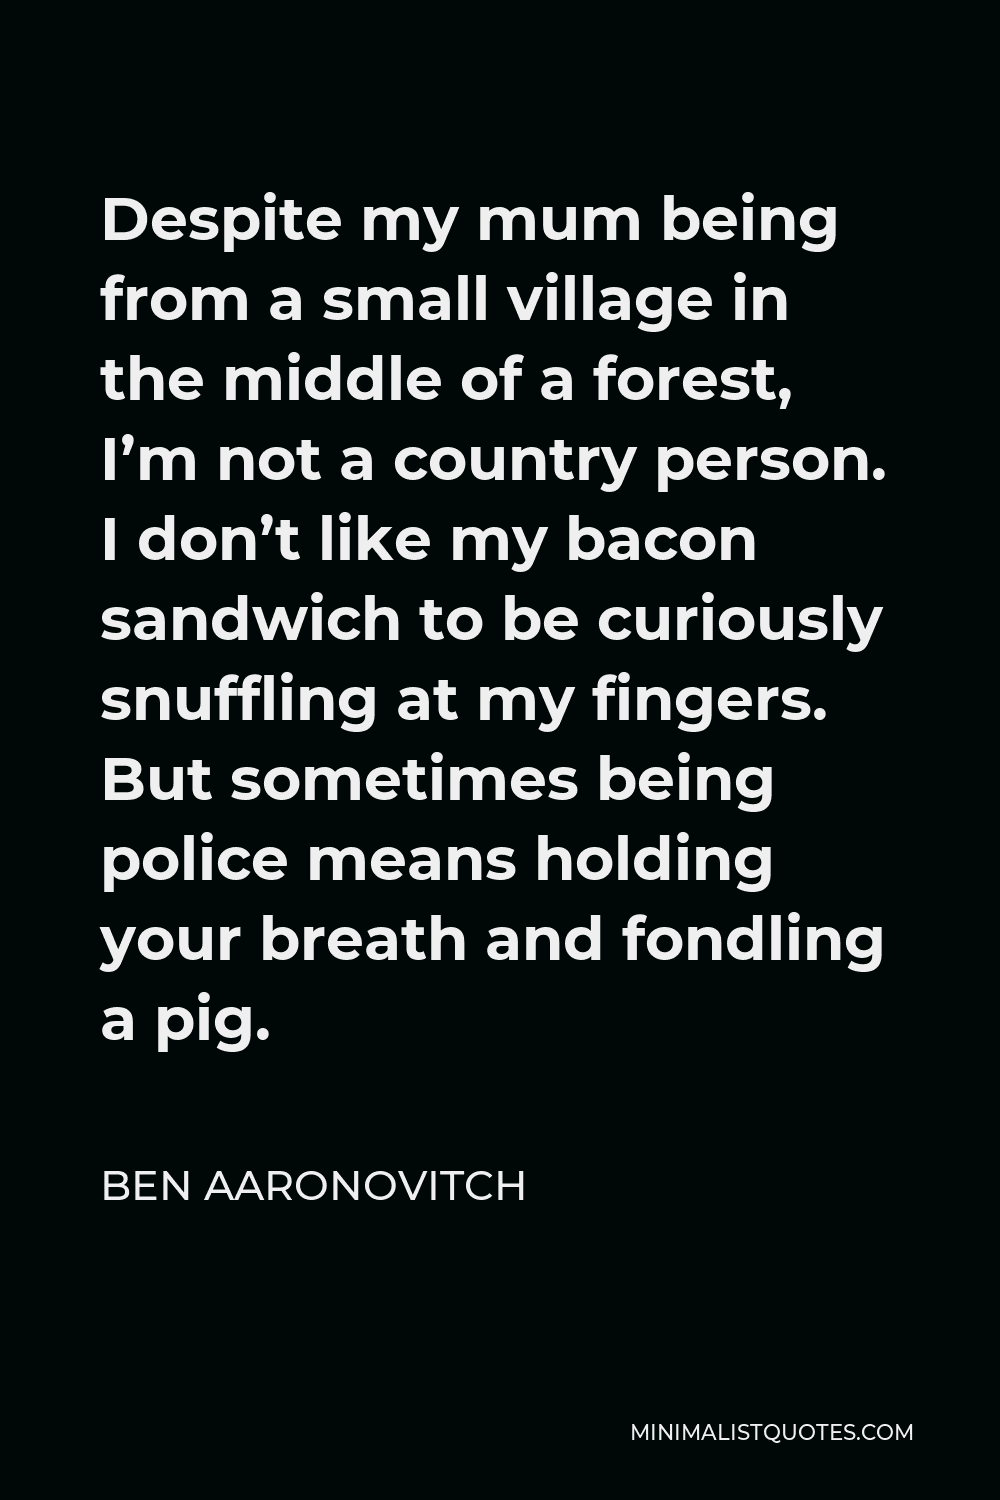 Ben Aaronovitch Quote - Despite my mum being from a small village in the middle of a forest, I’m not a country person. I don’t like my bacon sandwich to be curiously snuffling at my fingers. But sometimes being police means holding your breath and fondling a pig.